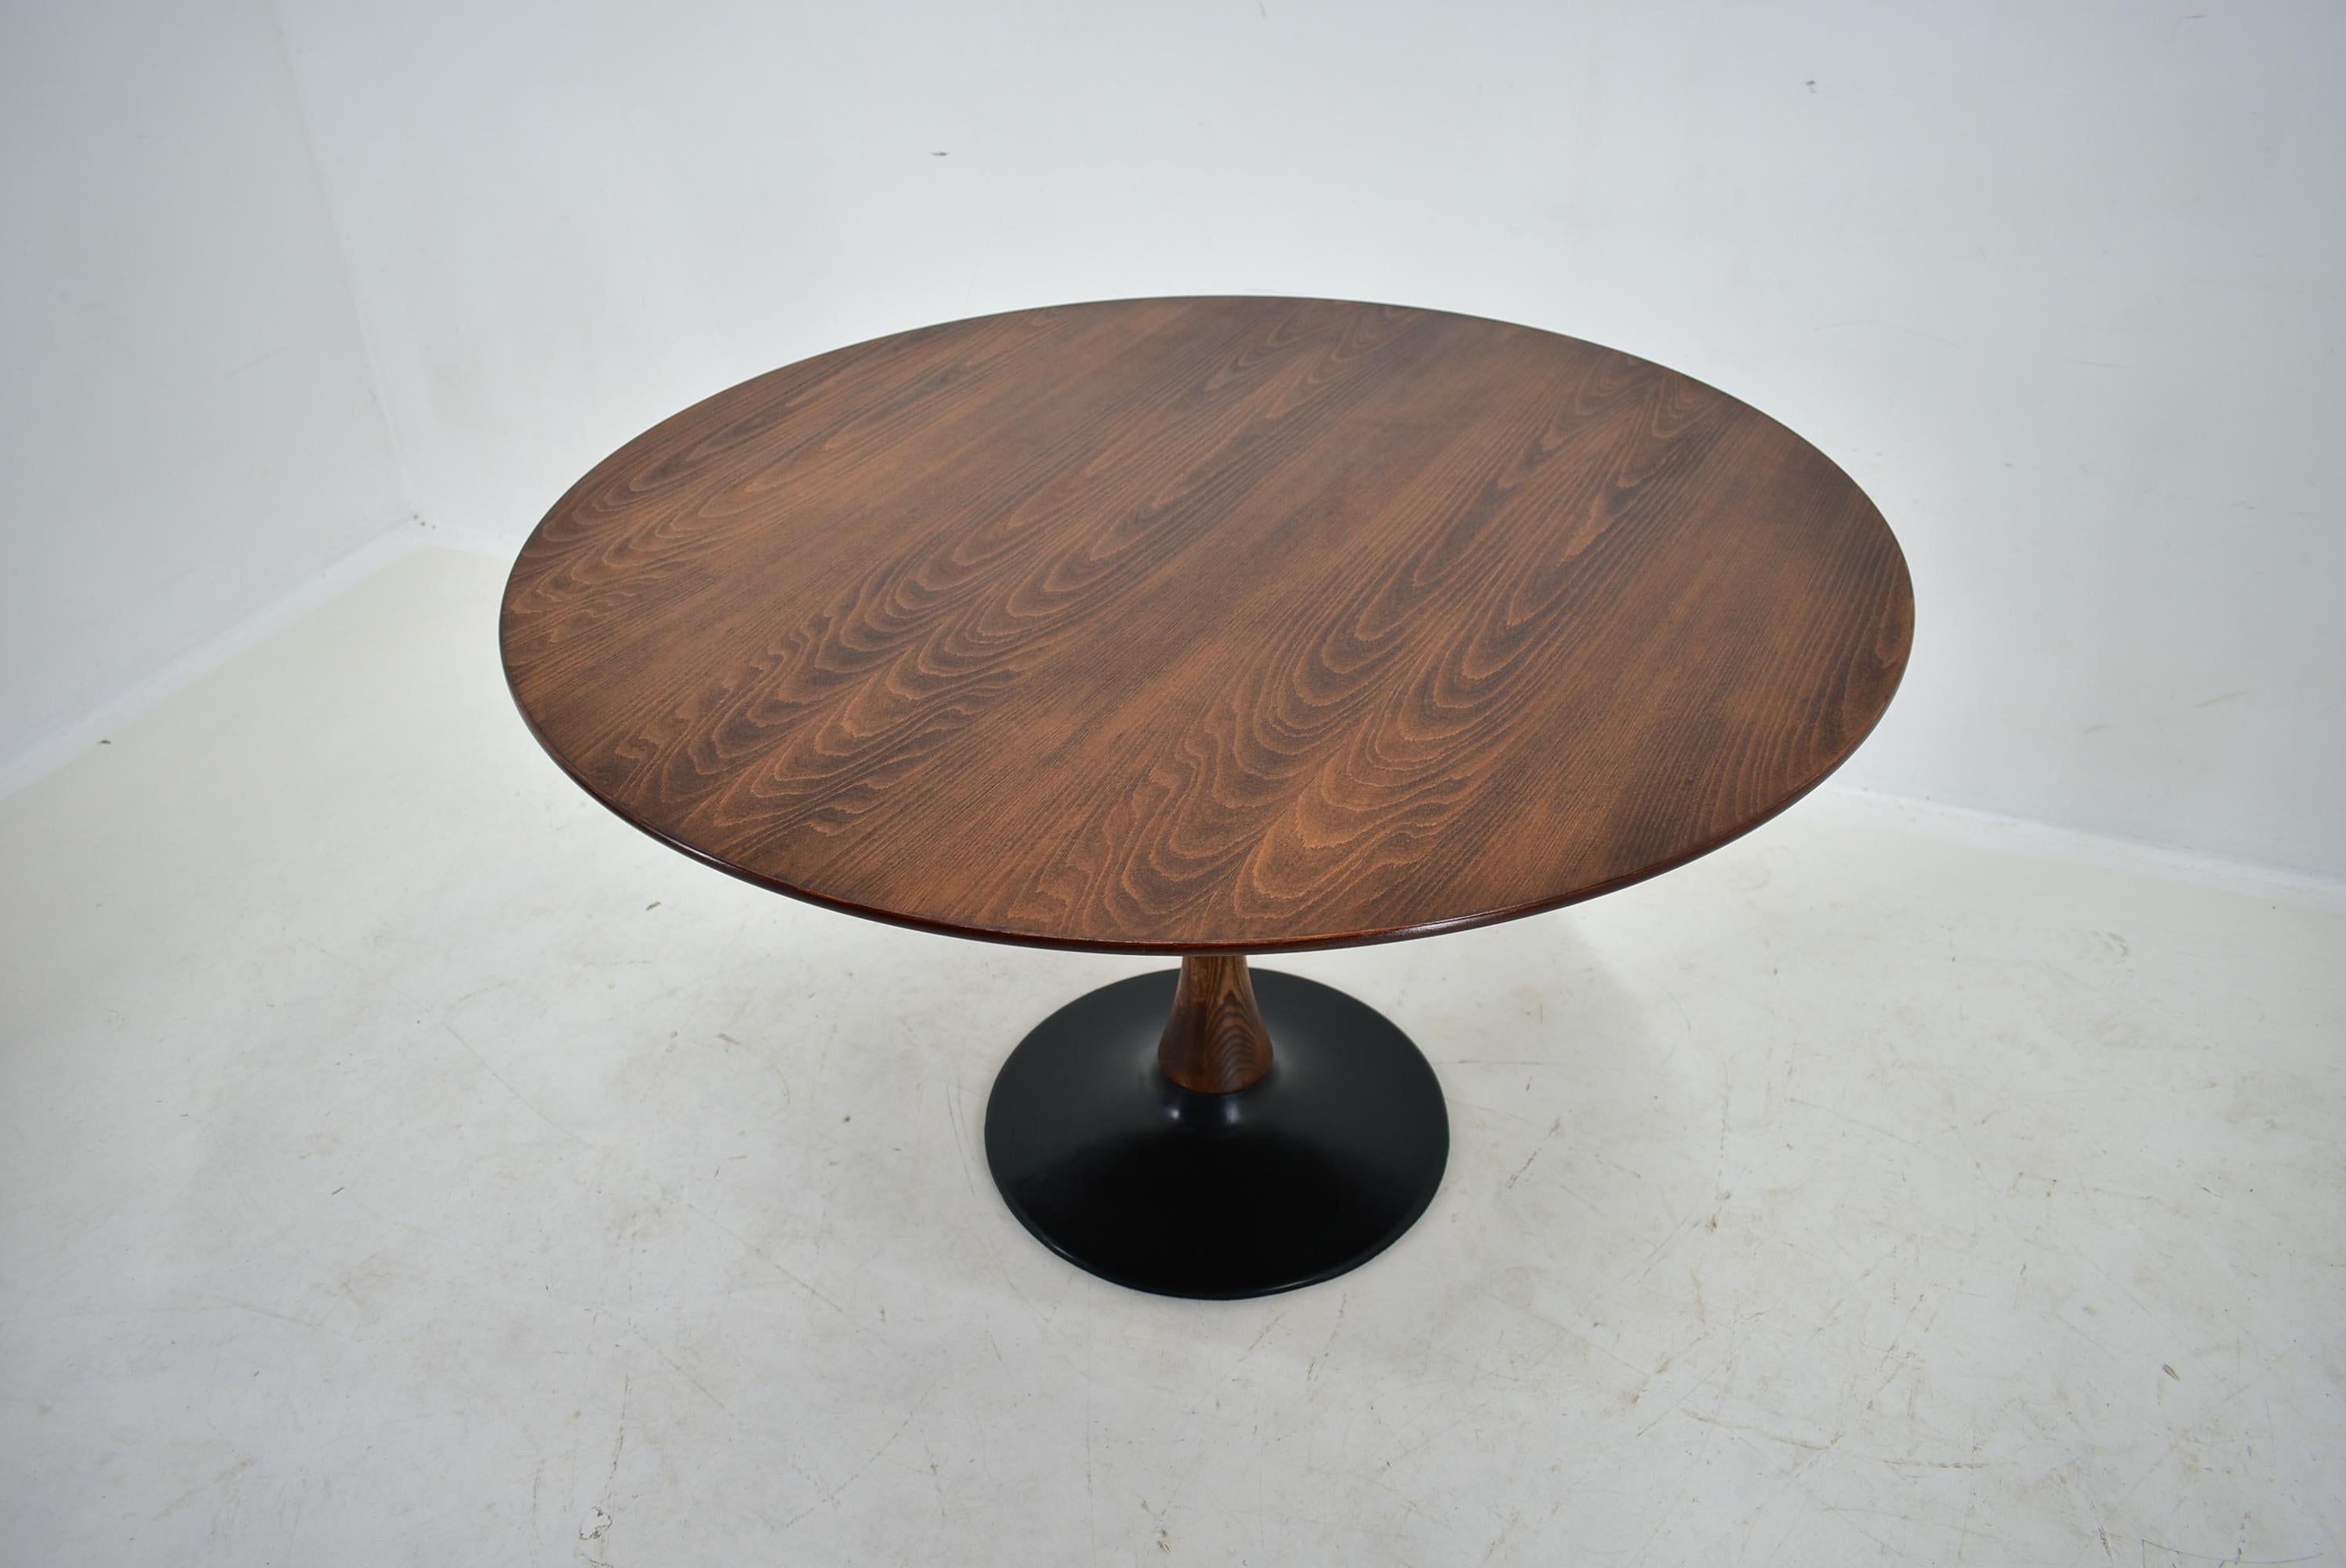 - Made in Czechoslovakia
- Made of beech, veneer, cast iron
- The table is Stabil
- Good condition.
- Cleaned.